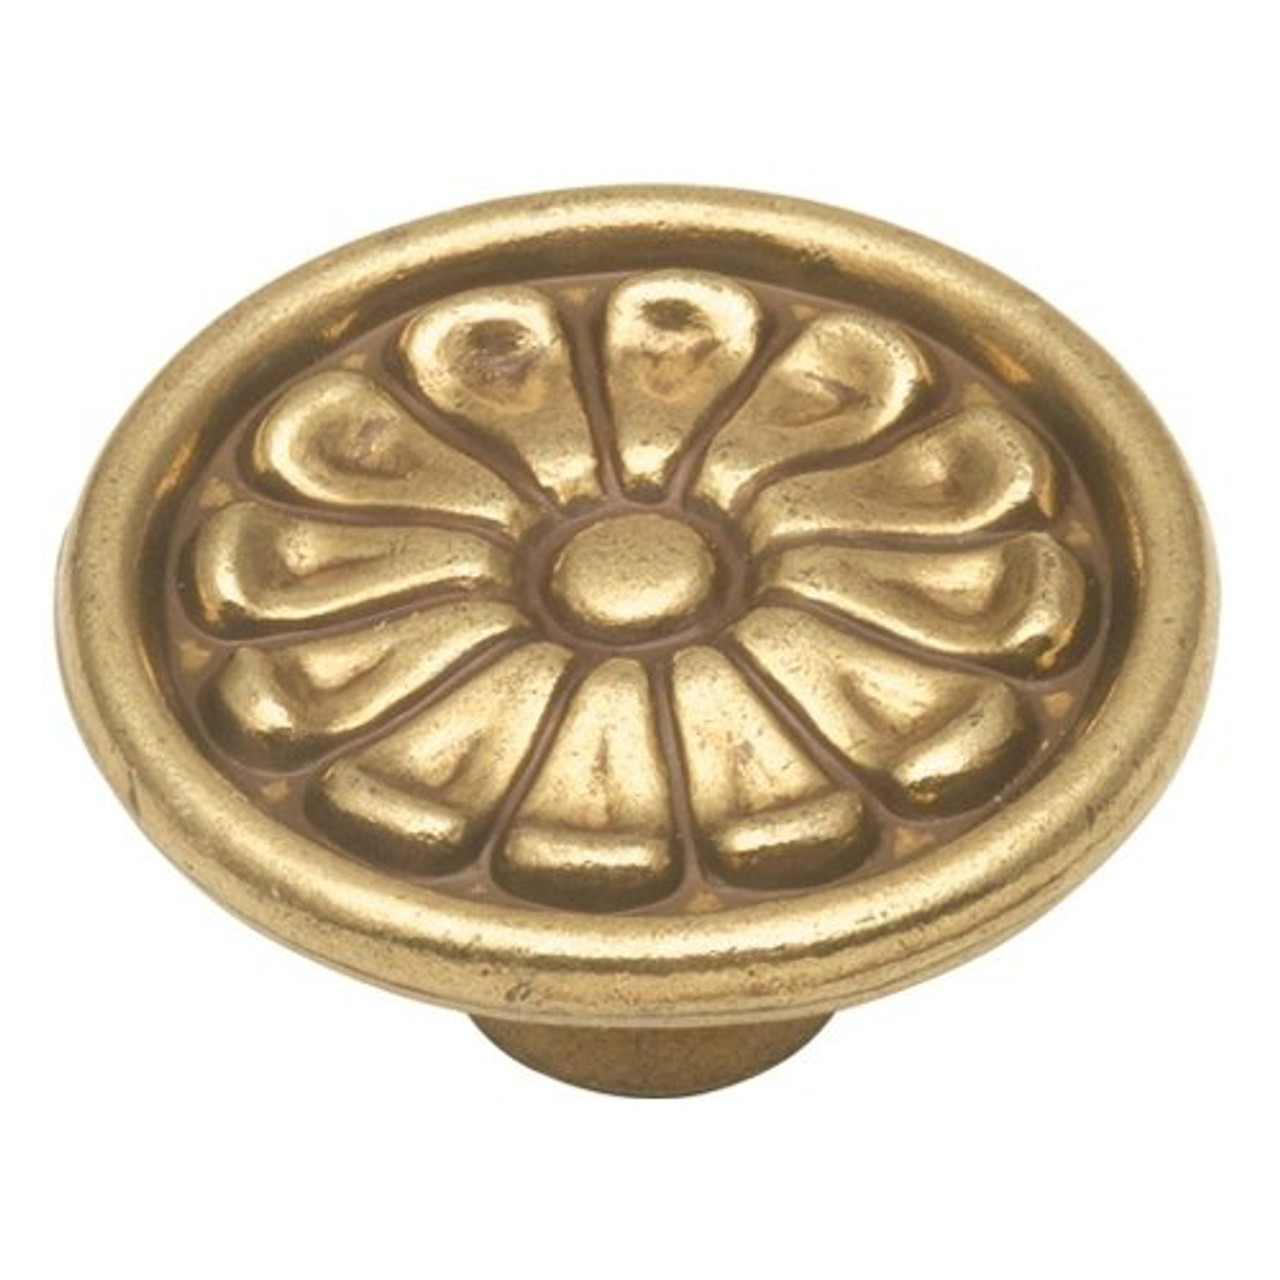 Hickory Hardware 1-5/8 INCH (41MM) MANOR HOUSE CABINET KNOB